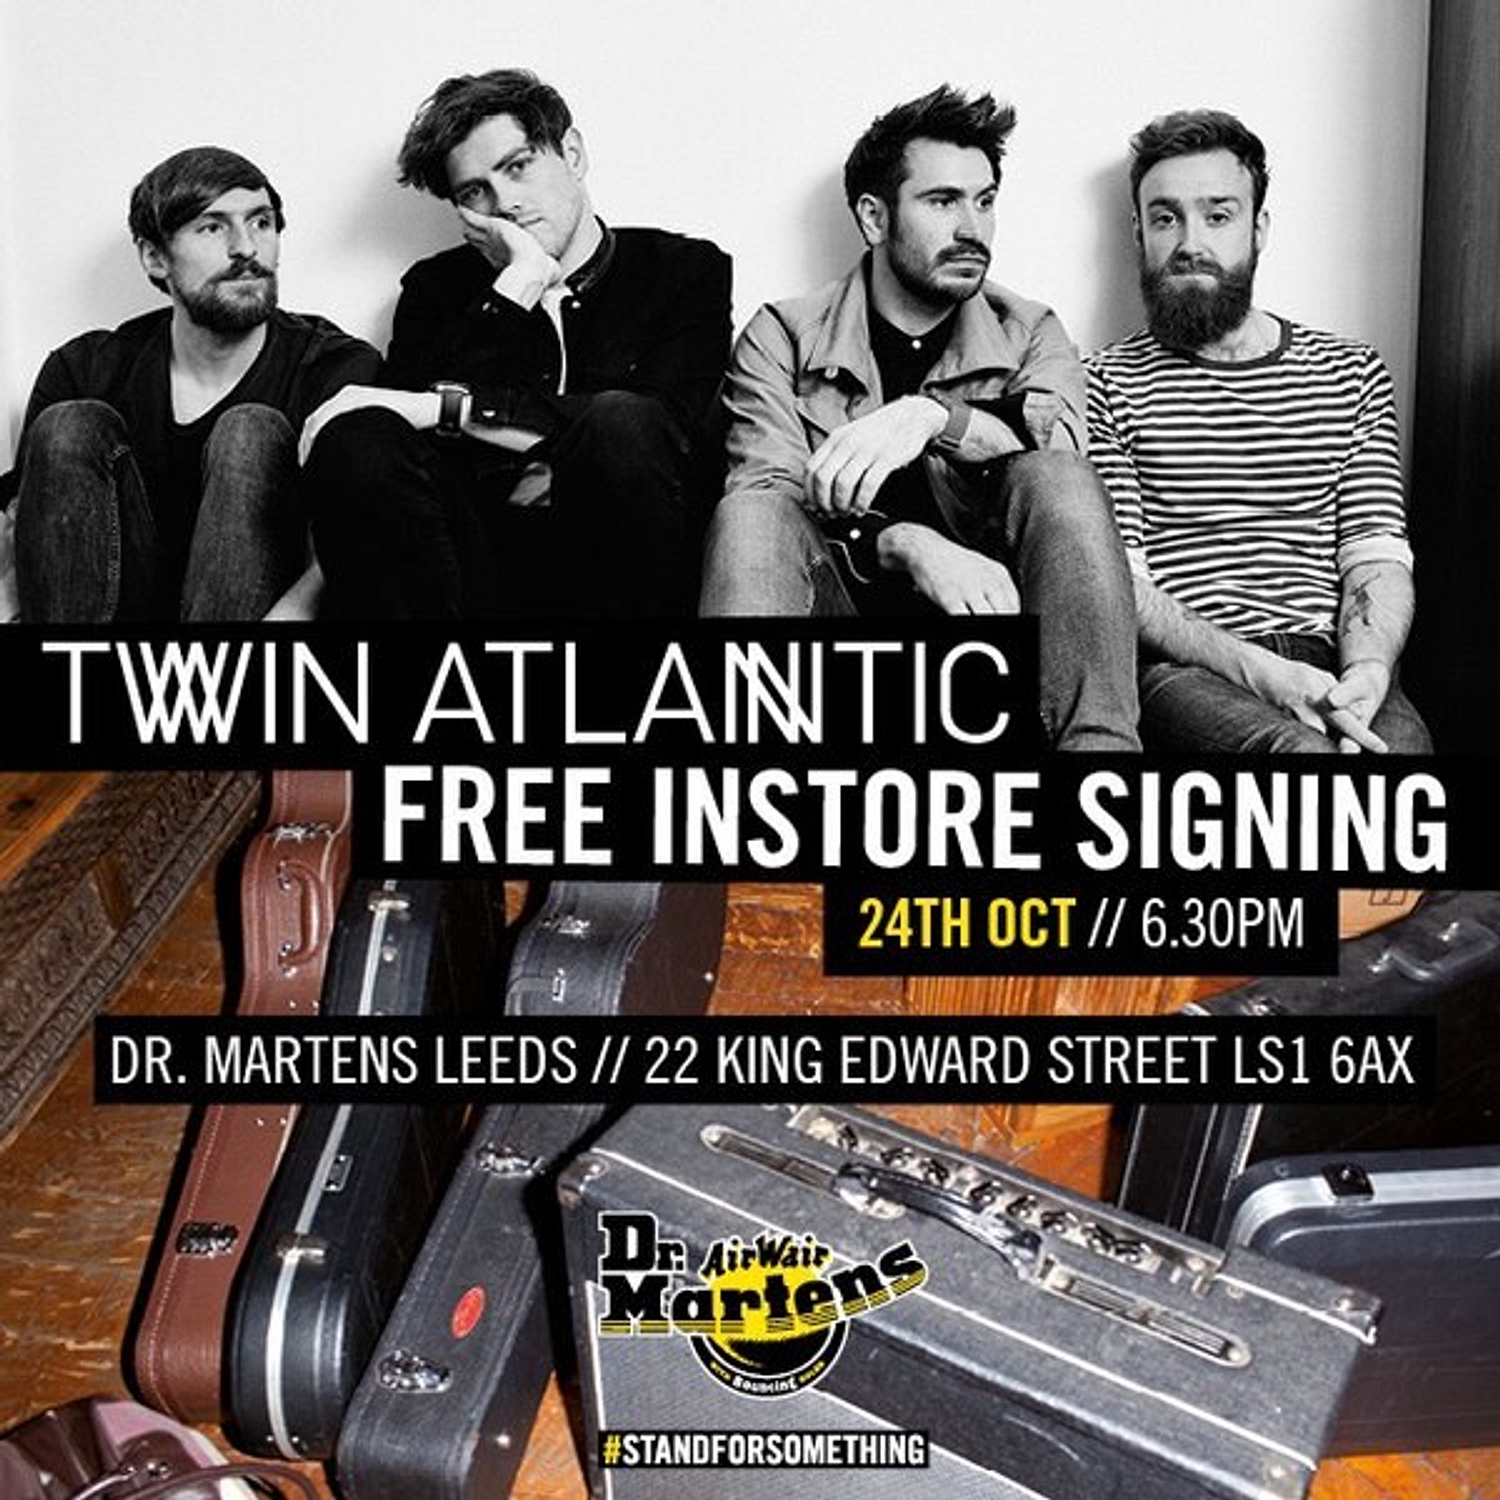 Twin Atlantic set for in-store signing at Dr. Martens' Leeds store this weekend